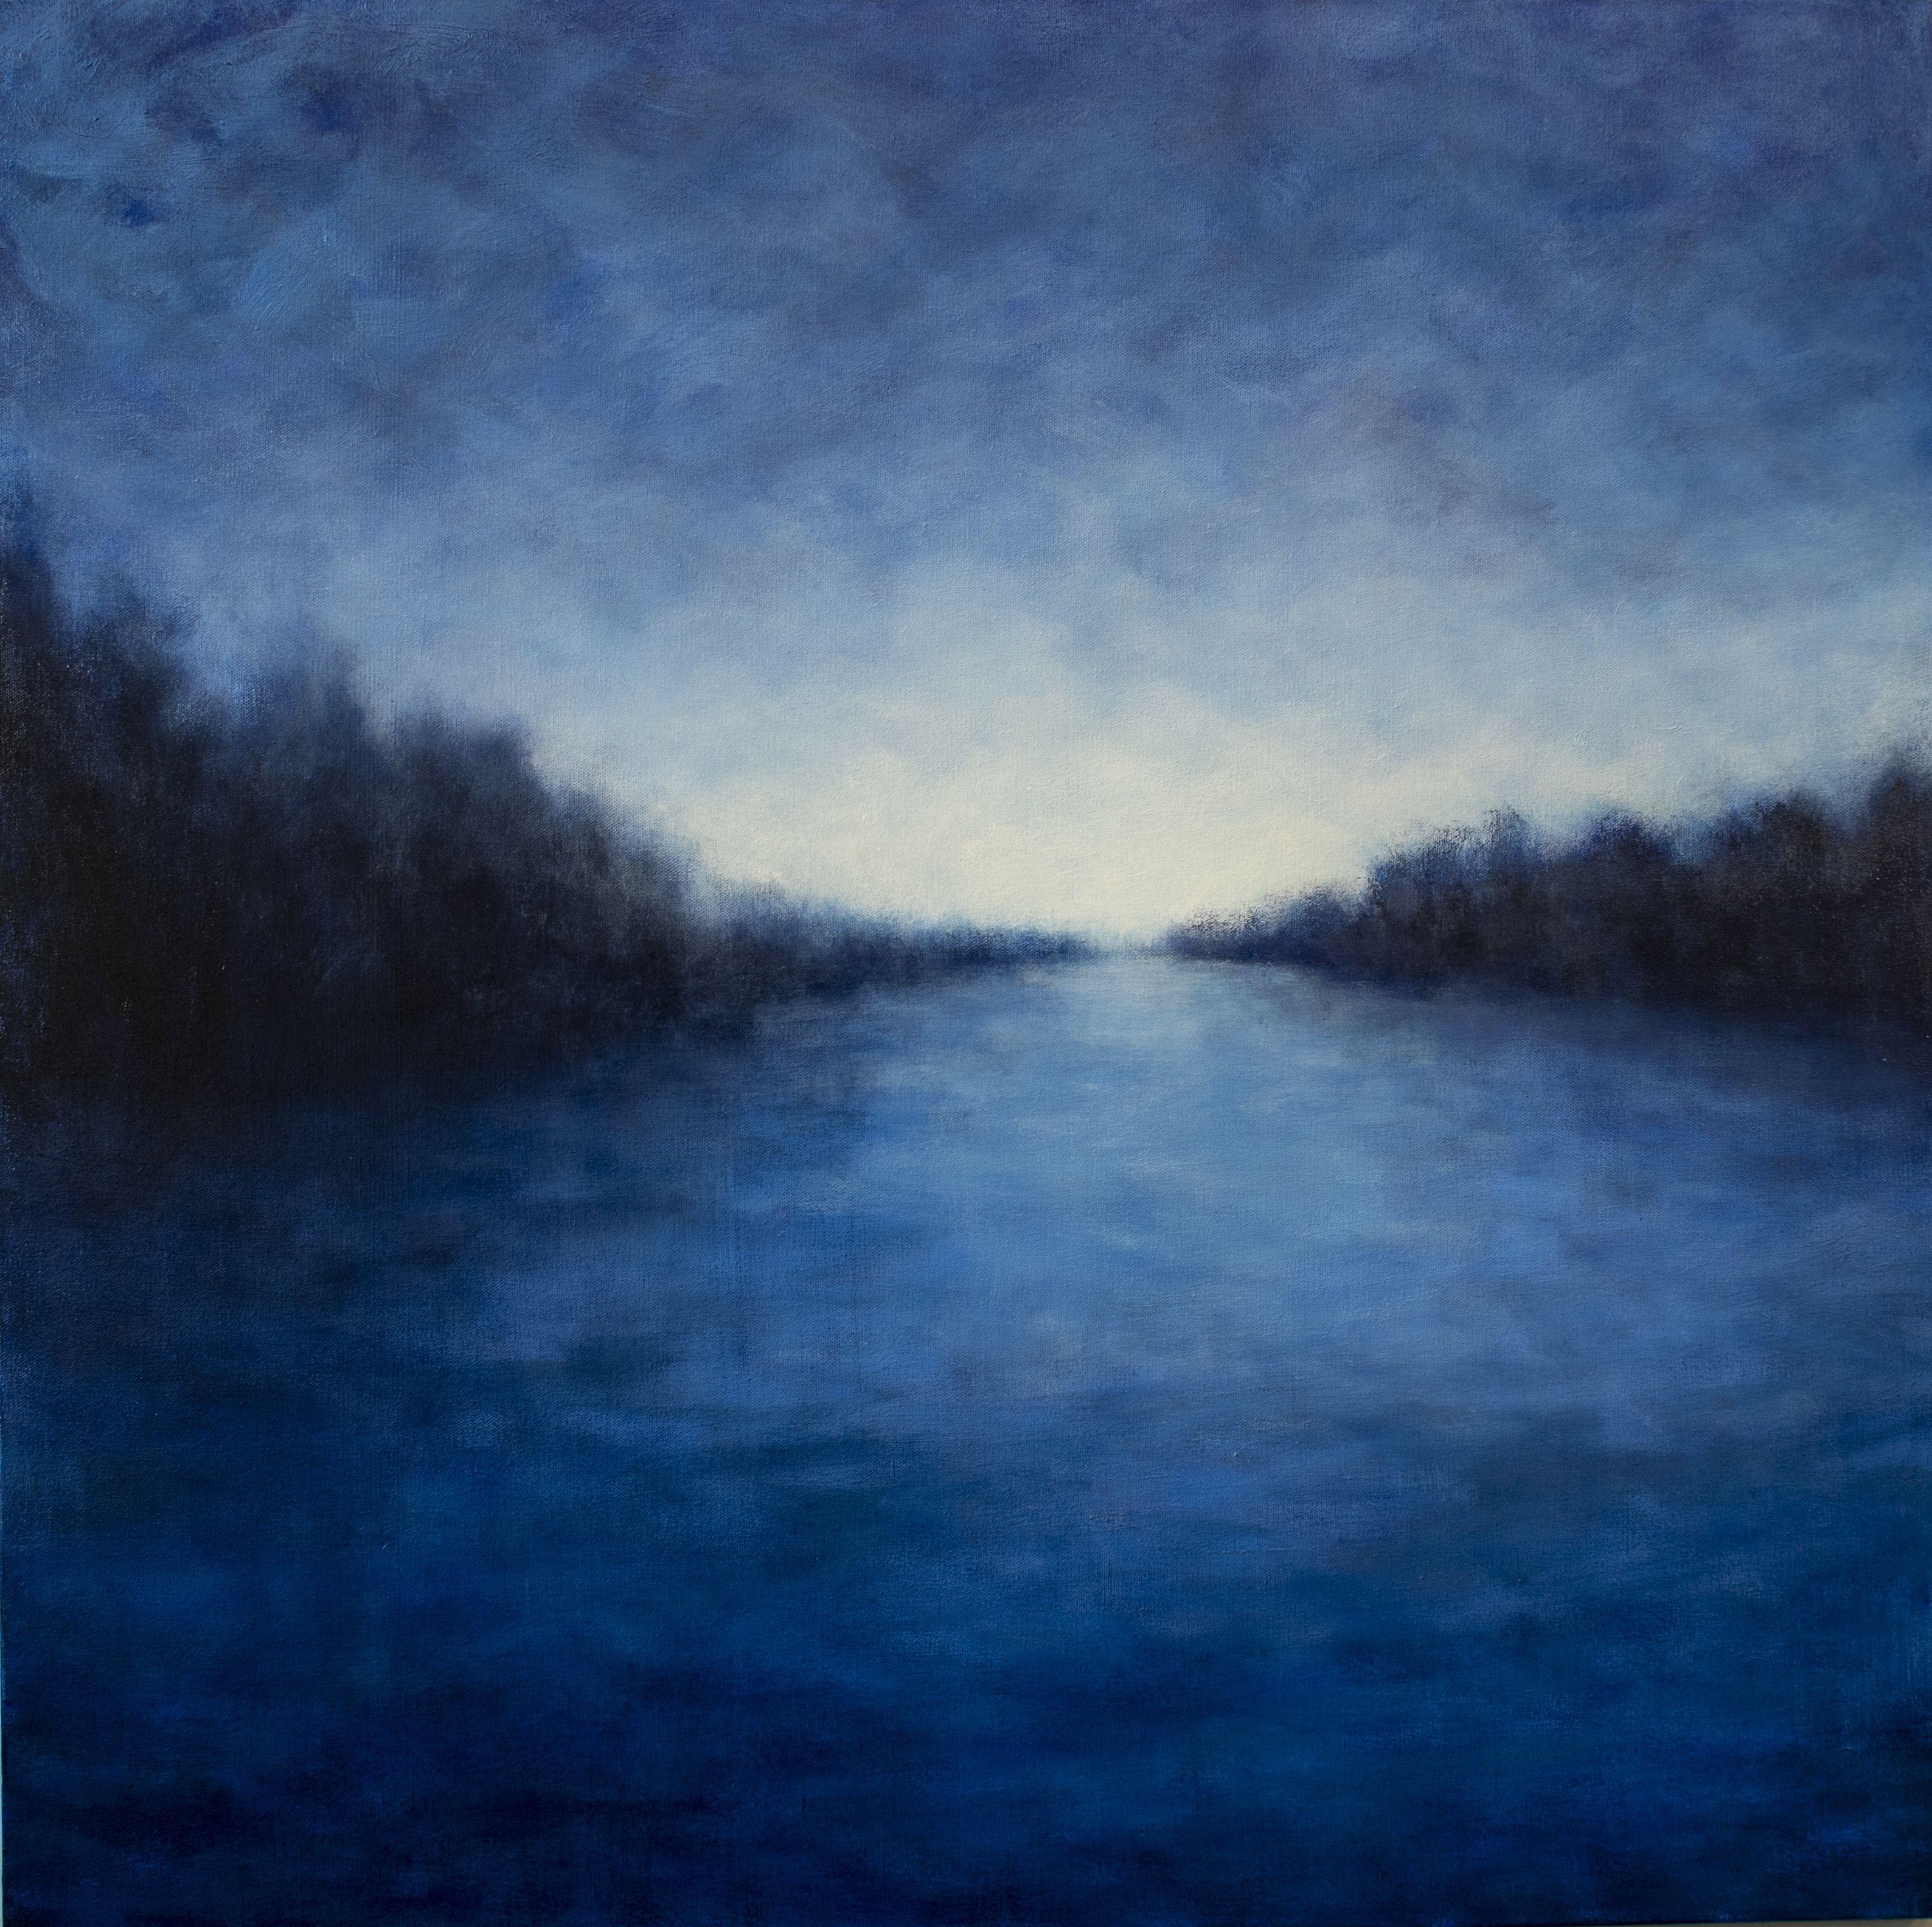 Victoria Veedell Landscape Painting - Evening on the Lake, Painting, Oil on Canvas